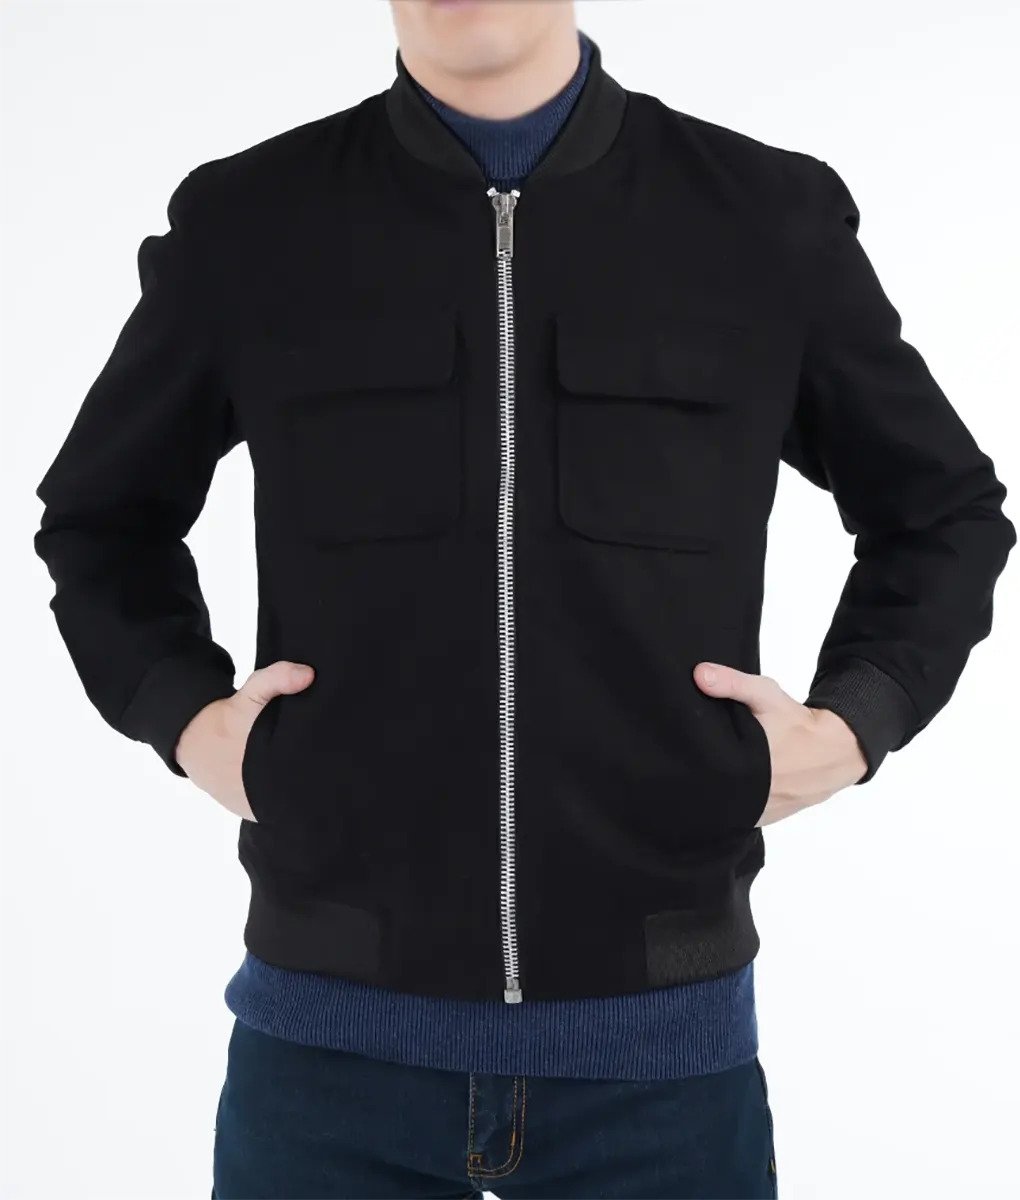 Marcus Vacation Friends Black Jacket (2)